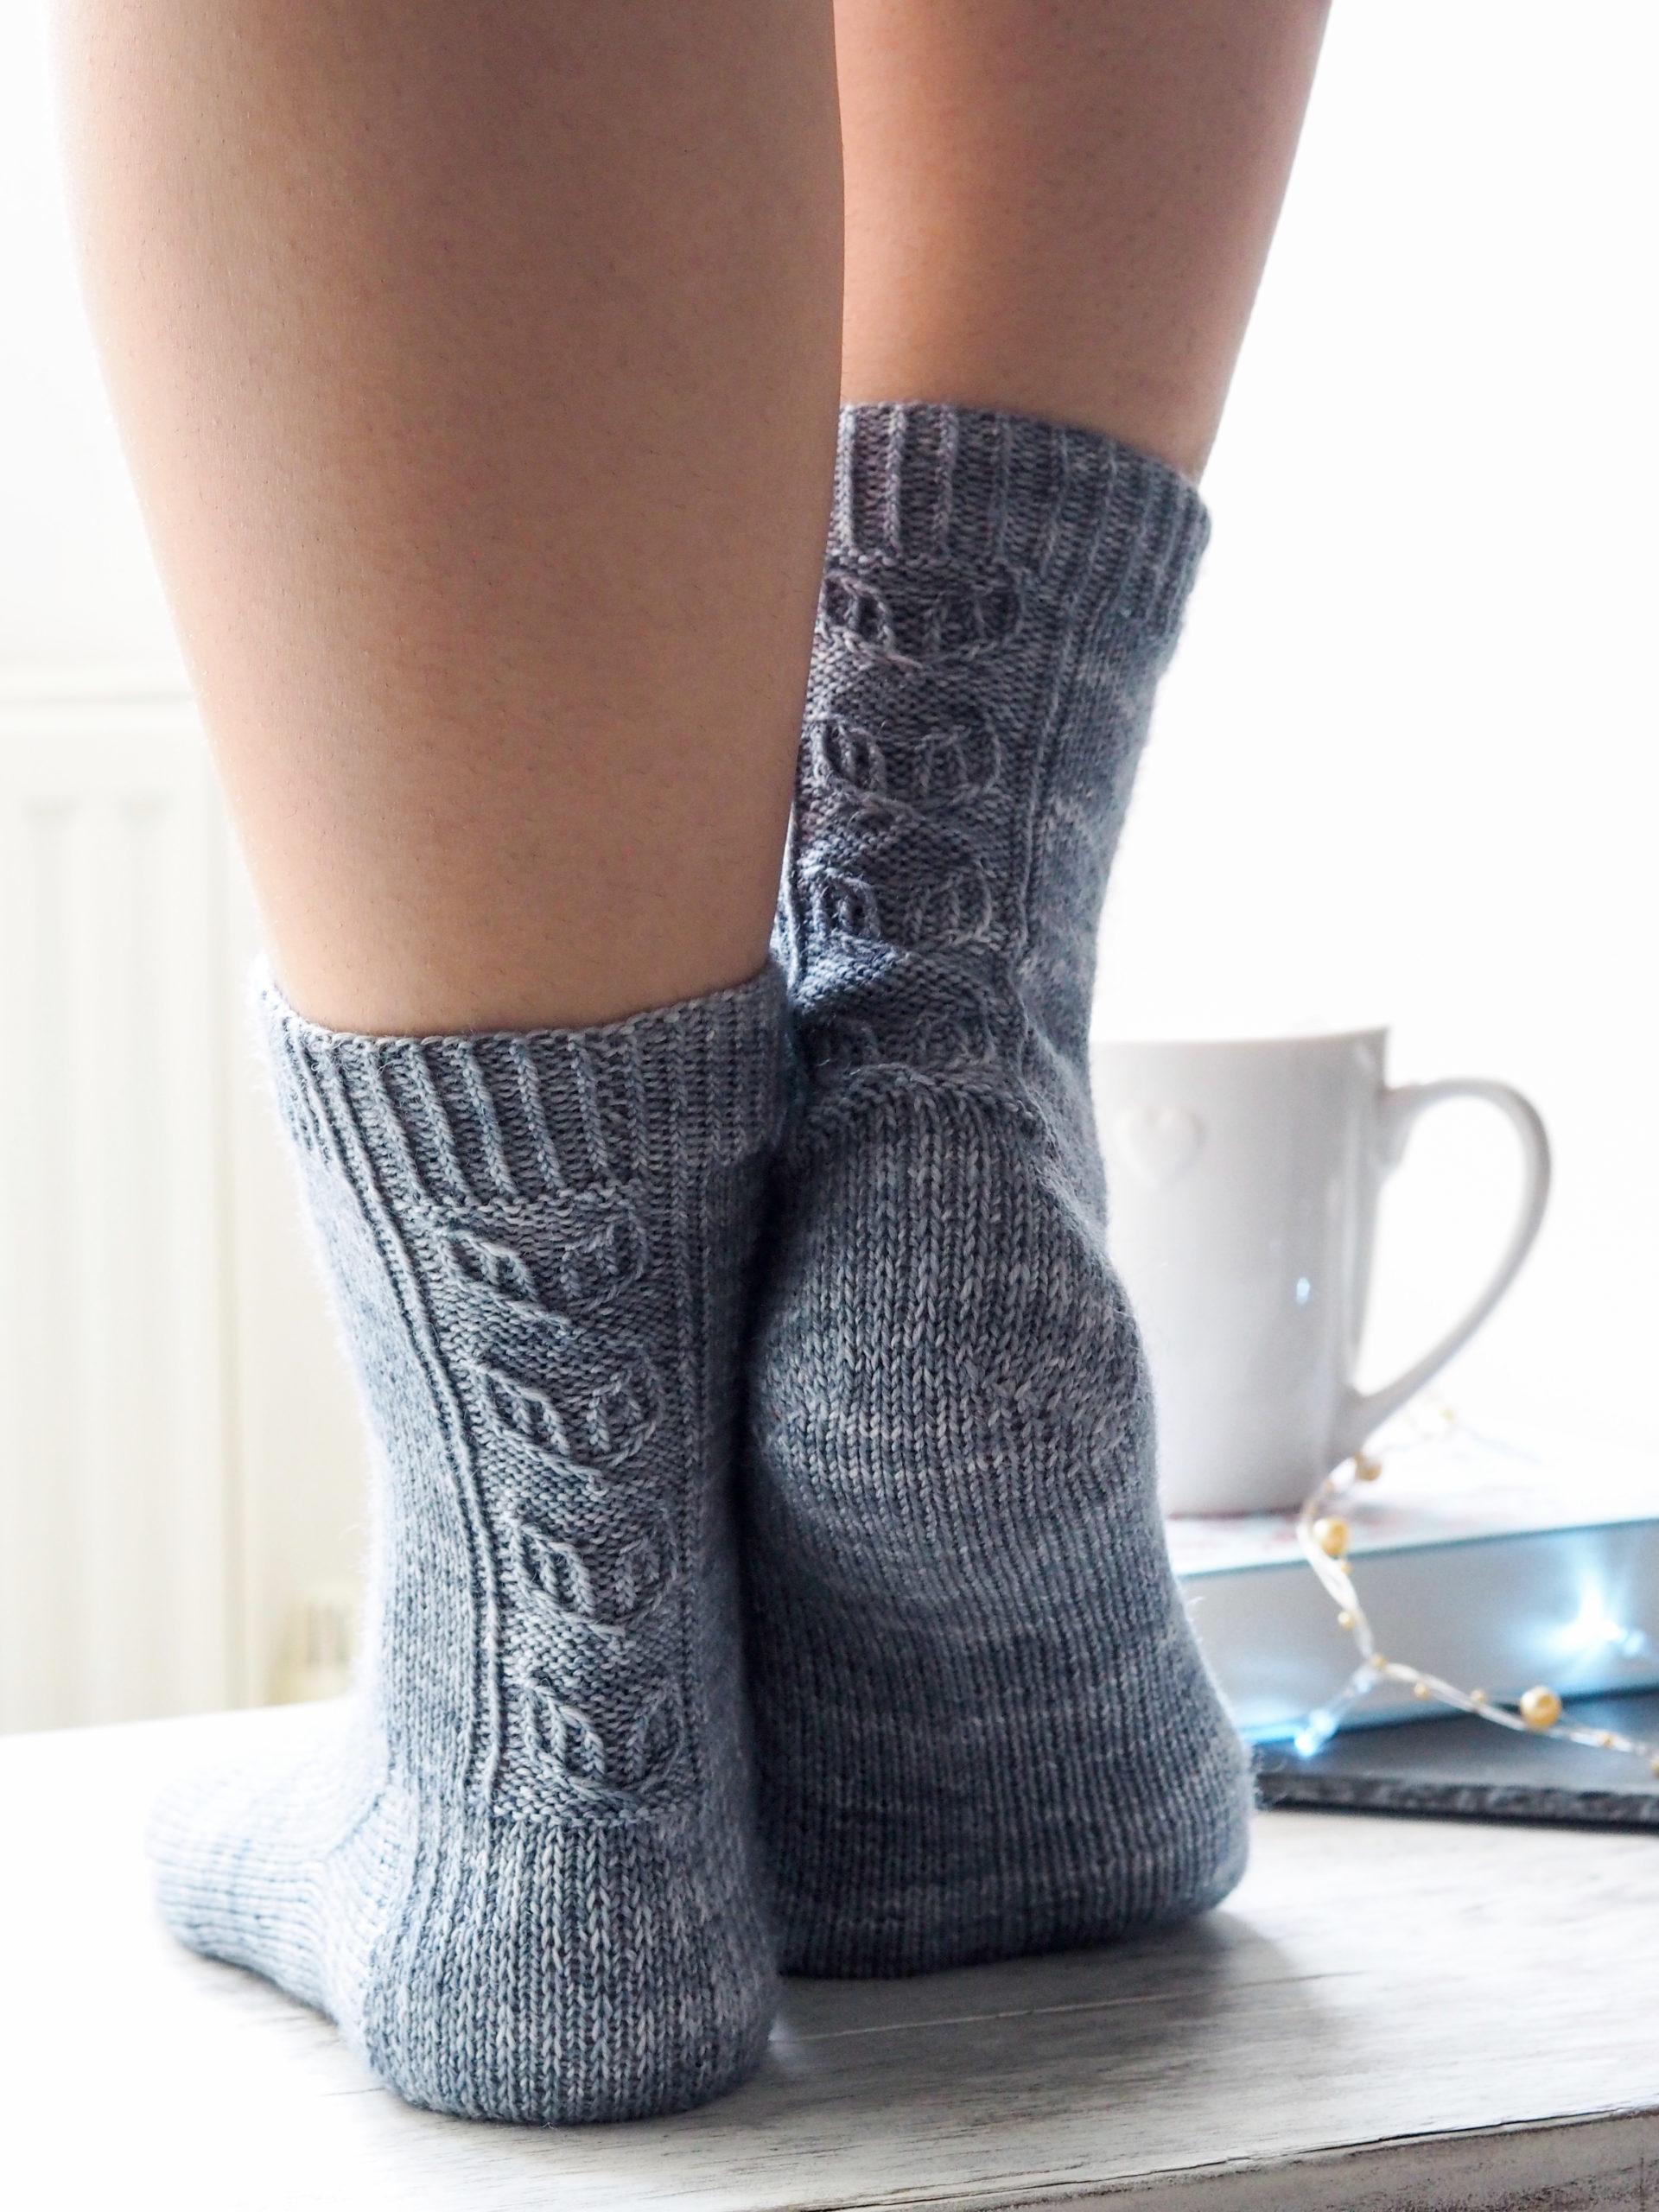 Humble Yoga Socks pattern by 12 Little Things  Yoga socks pattern, Sock  patterns, Yoga socks